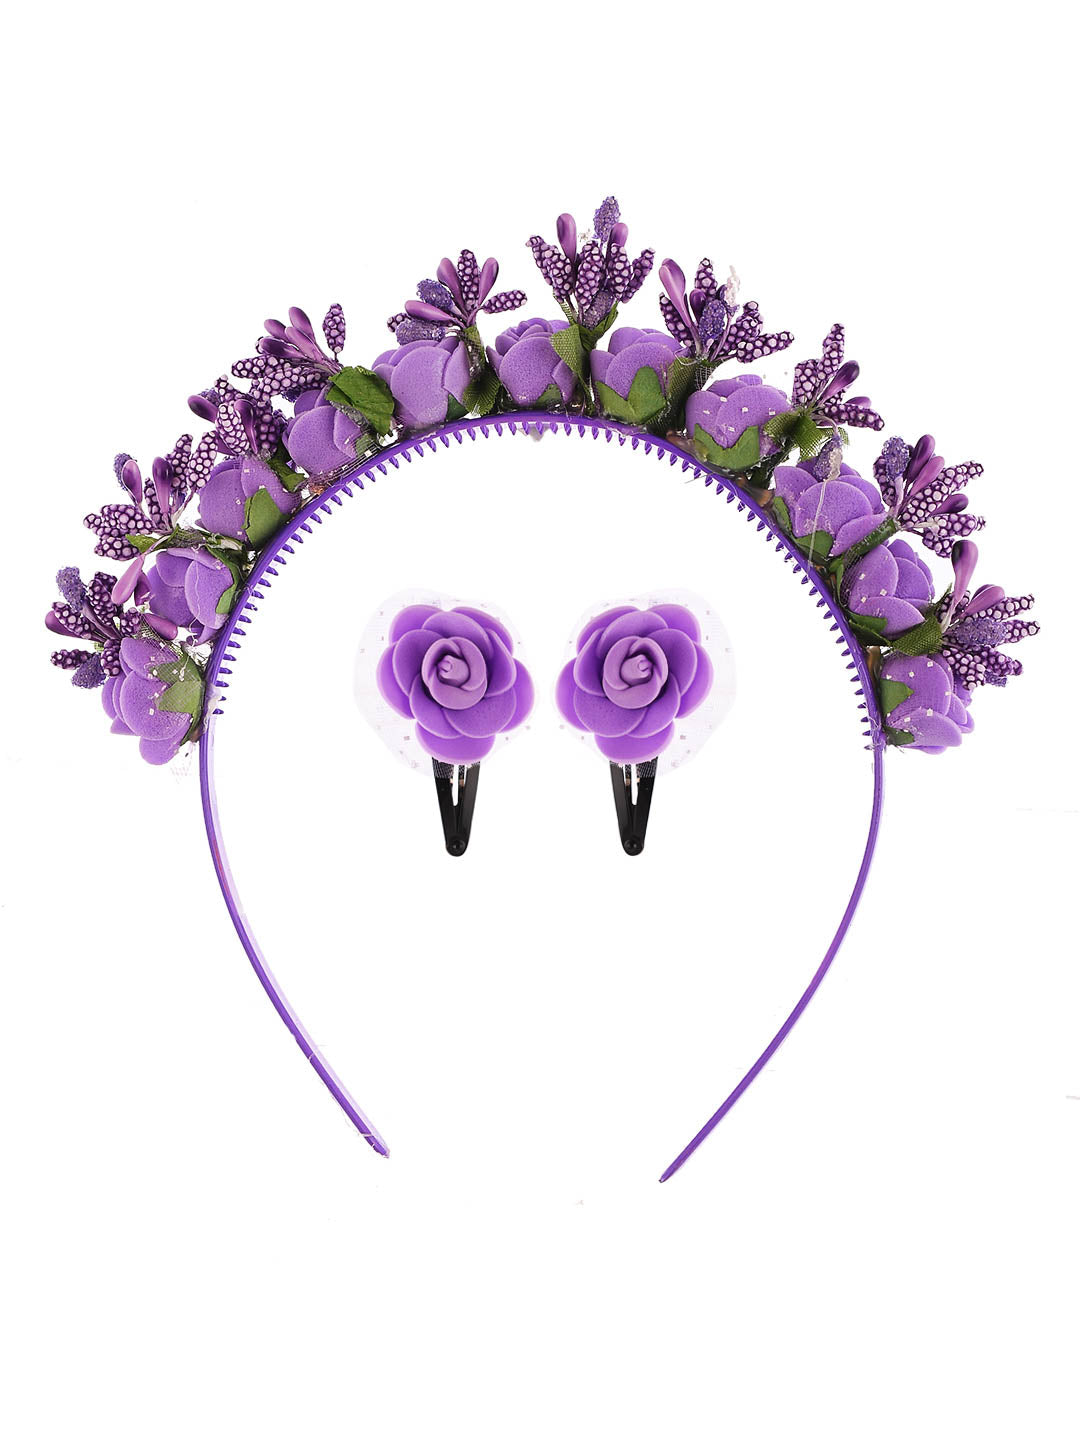 Violet Tiara Hairband With Tic Tac Hairpin Accessory